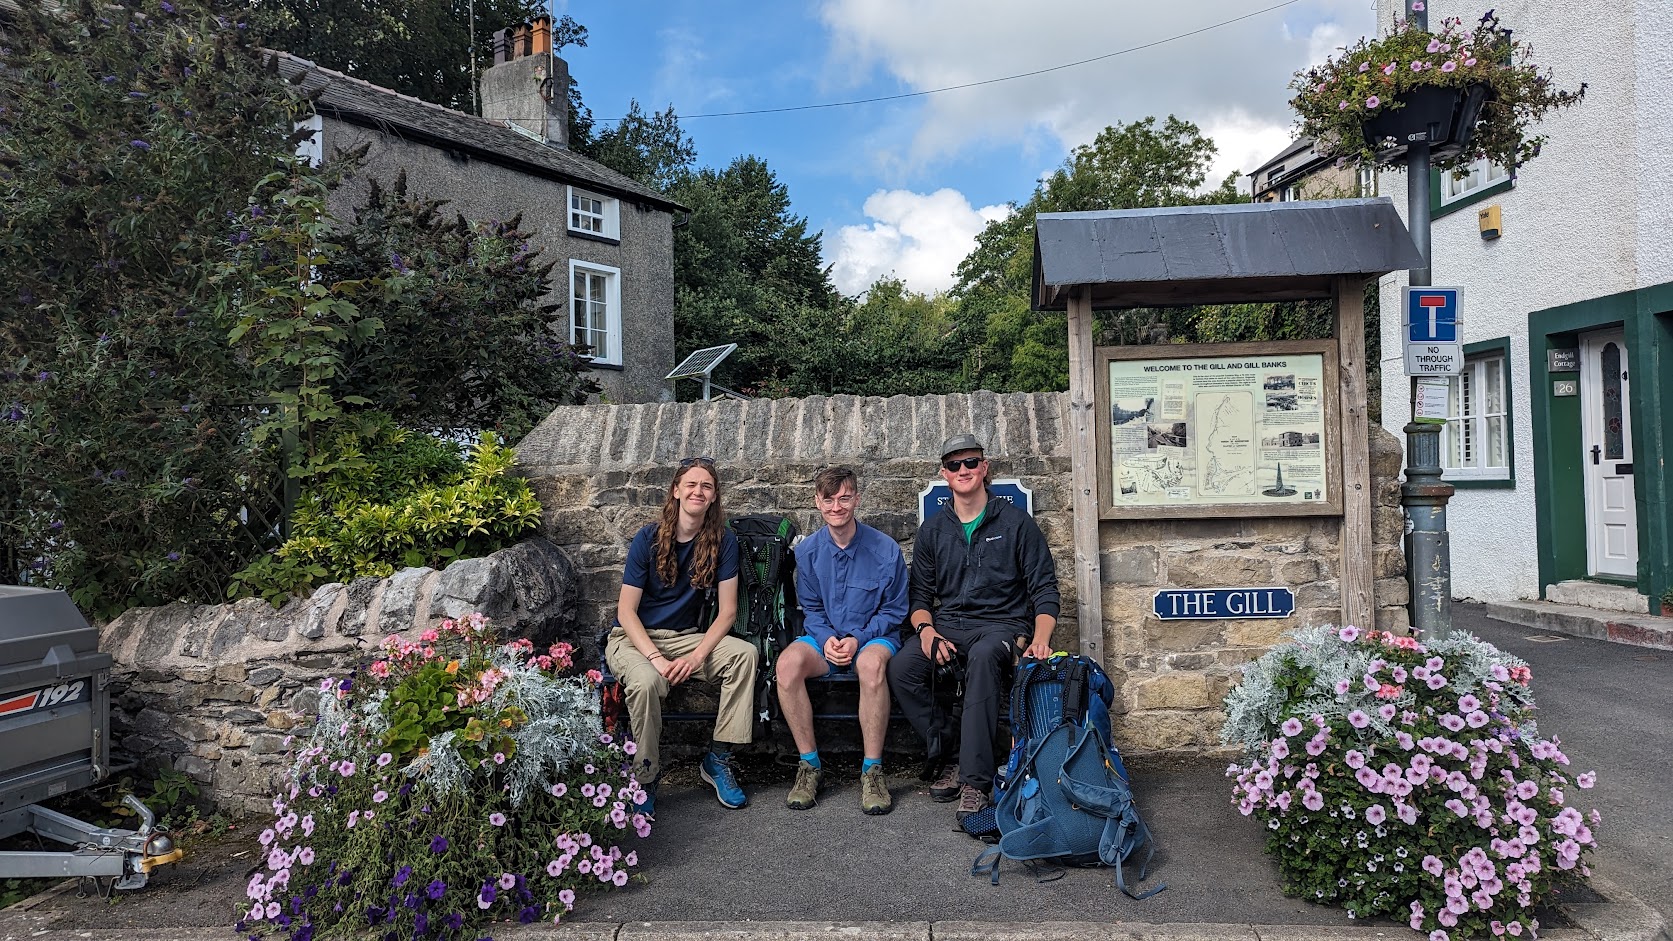 I have also walked the Cumbria Way, a 71-mile long-distance footpath. Much of the route lies inside the boundaries of the Lake District National Park, linking the two historic Cumbrian towns of Ulverston and Carlisle, the Cumbria Way passes through the towns of Coniston and Keswick.